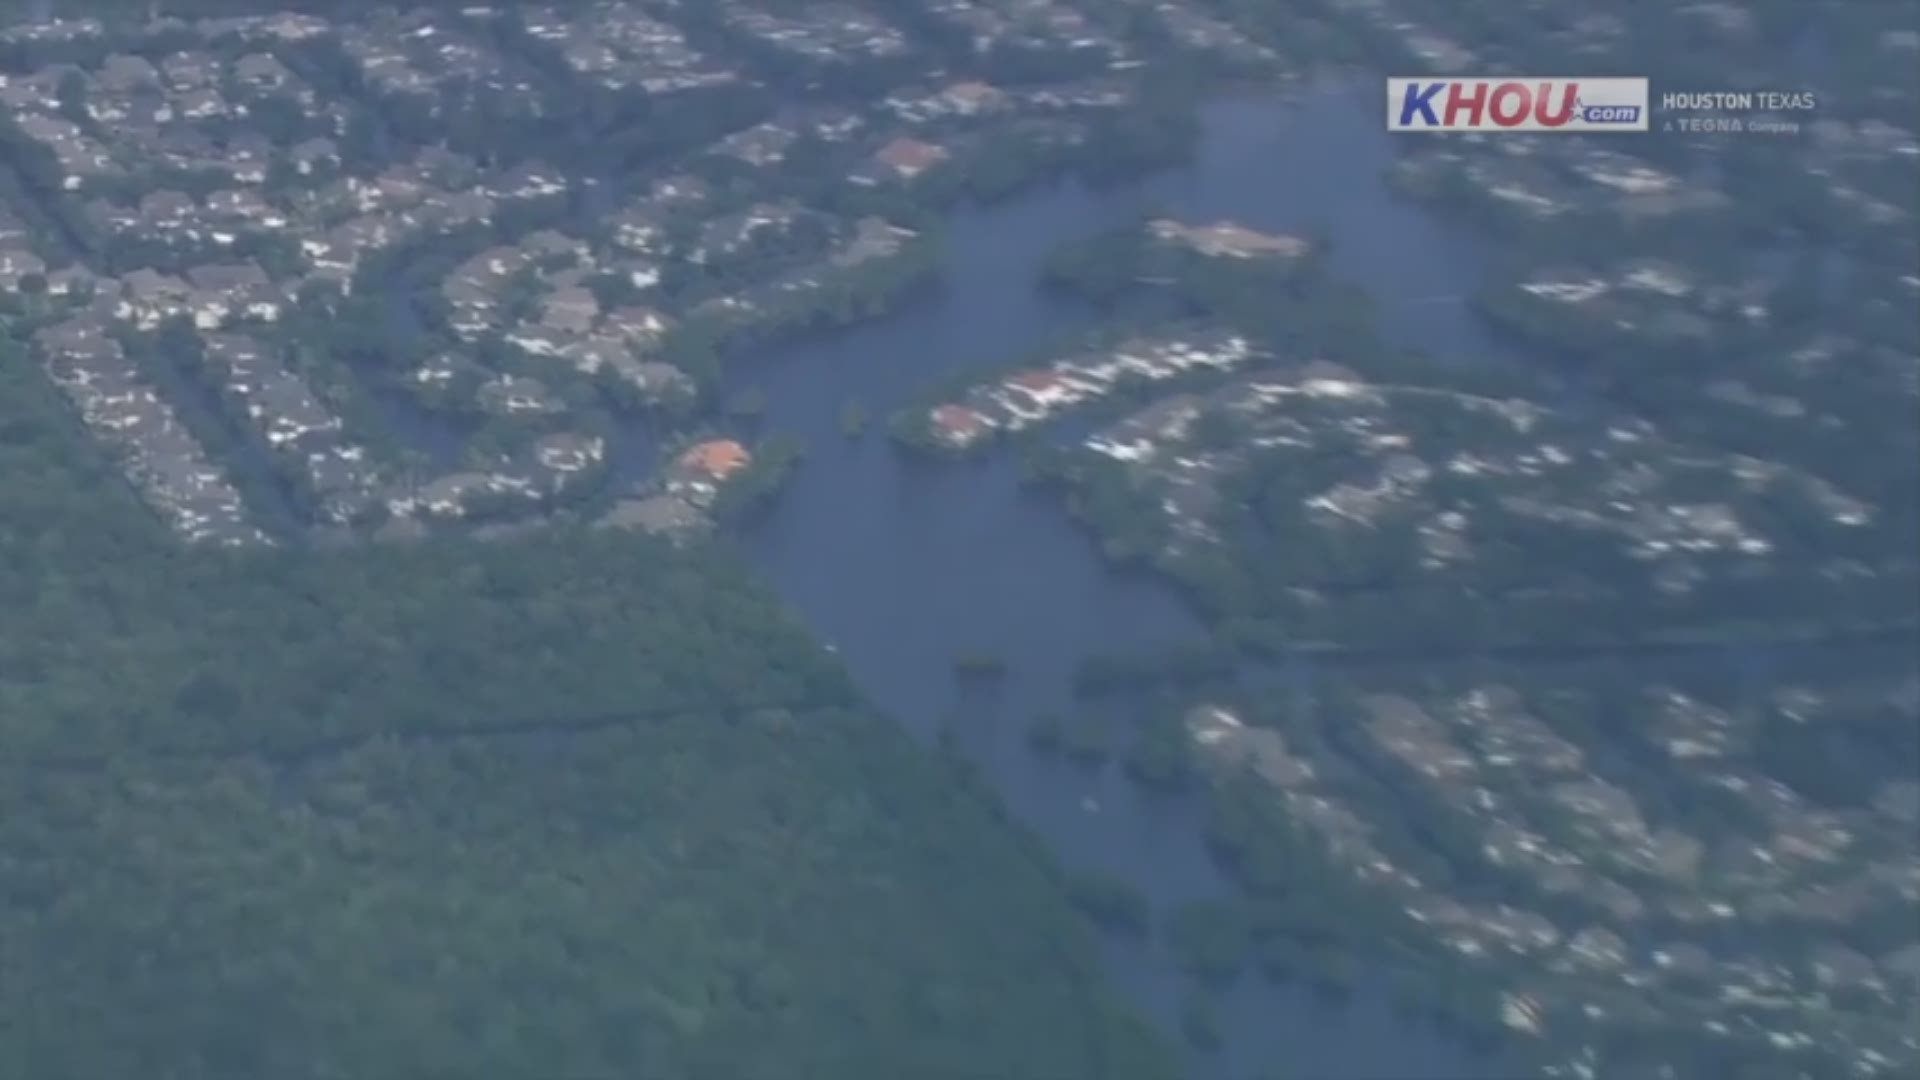 Here is an aerial view of the catastrophic flooding throughout the Houston area.